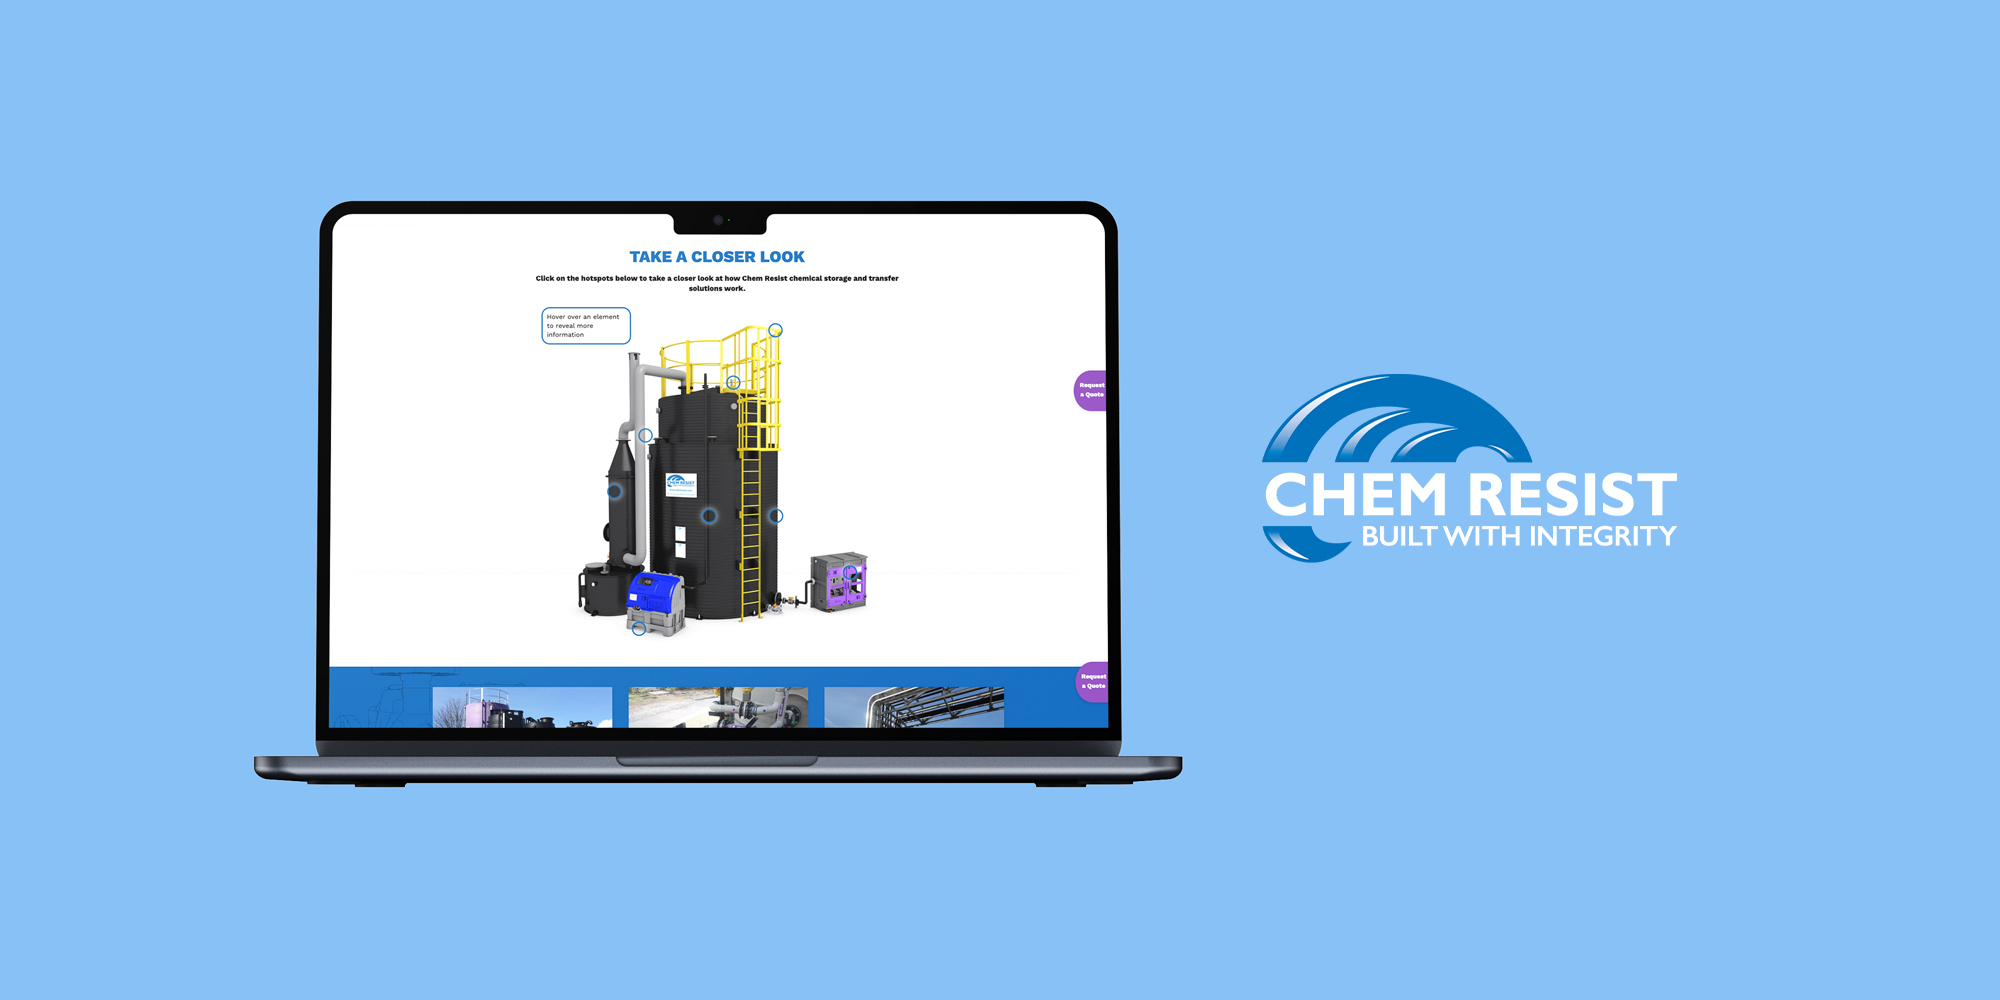 Chem resist logo and pages shown on a laptop screen